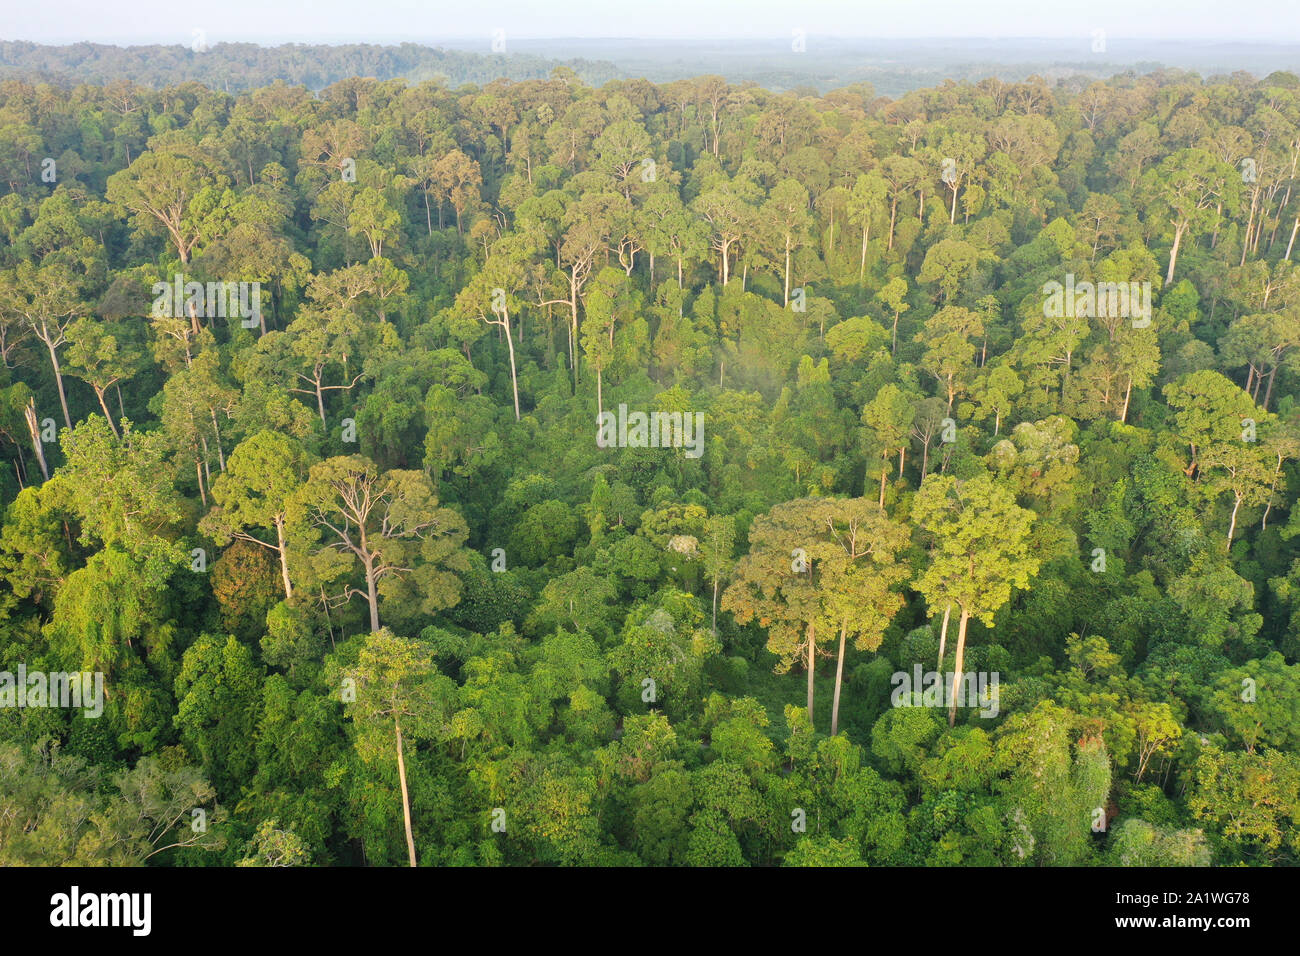 Aerial view of Borneo Rainforest of Rain Forest. Stock Photo